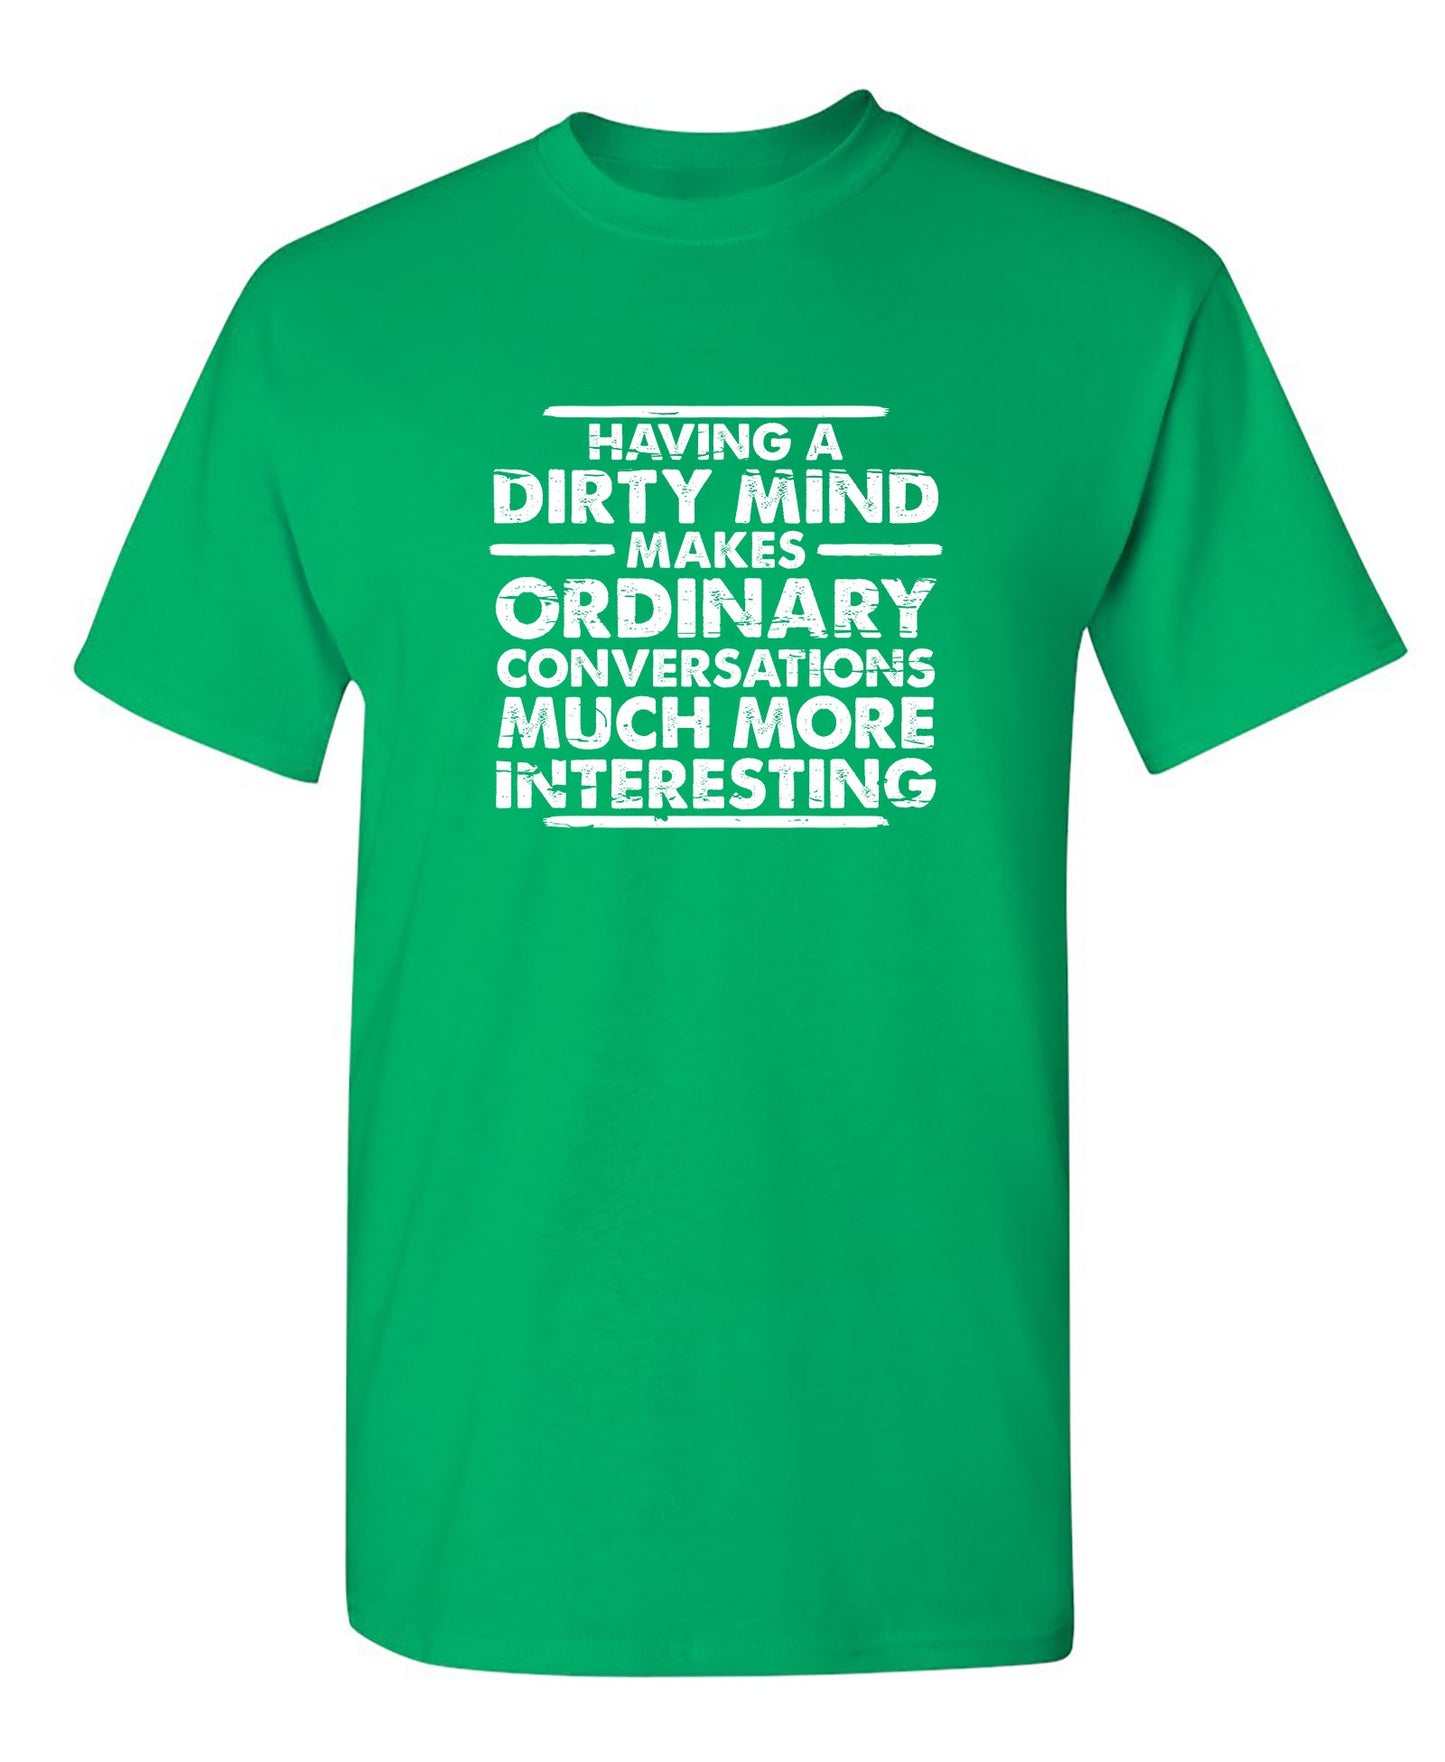 Having A Dirty Mind Makes Ordinary Conversations Much More Interesting - Funny T Shirts & Graphic Tees